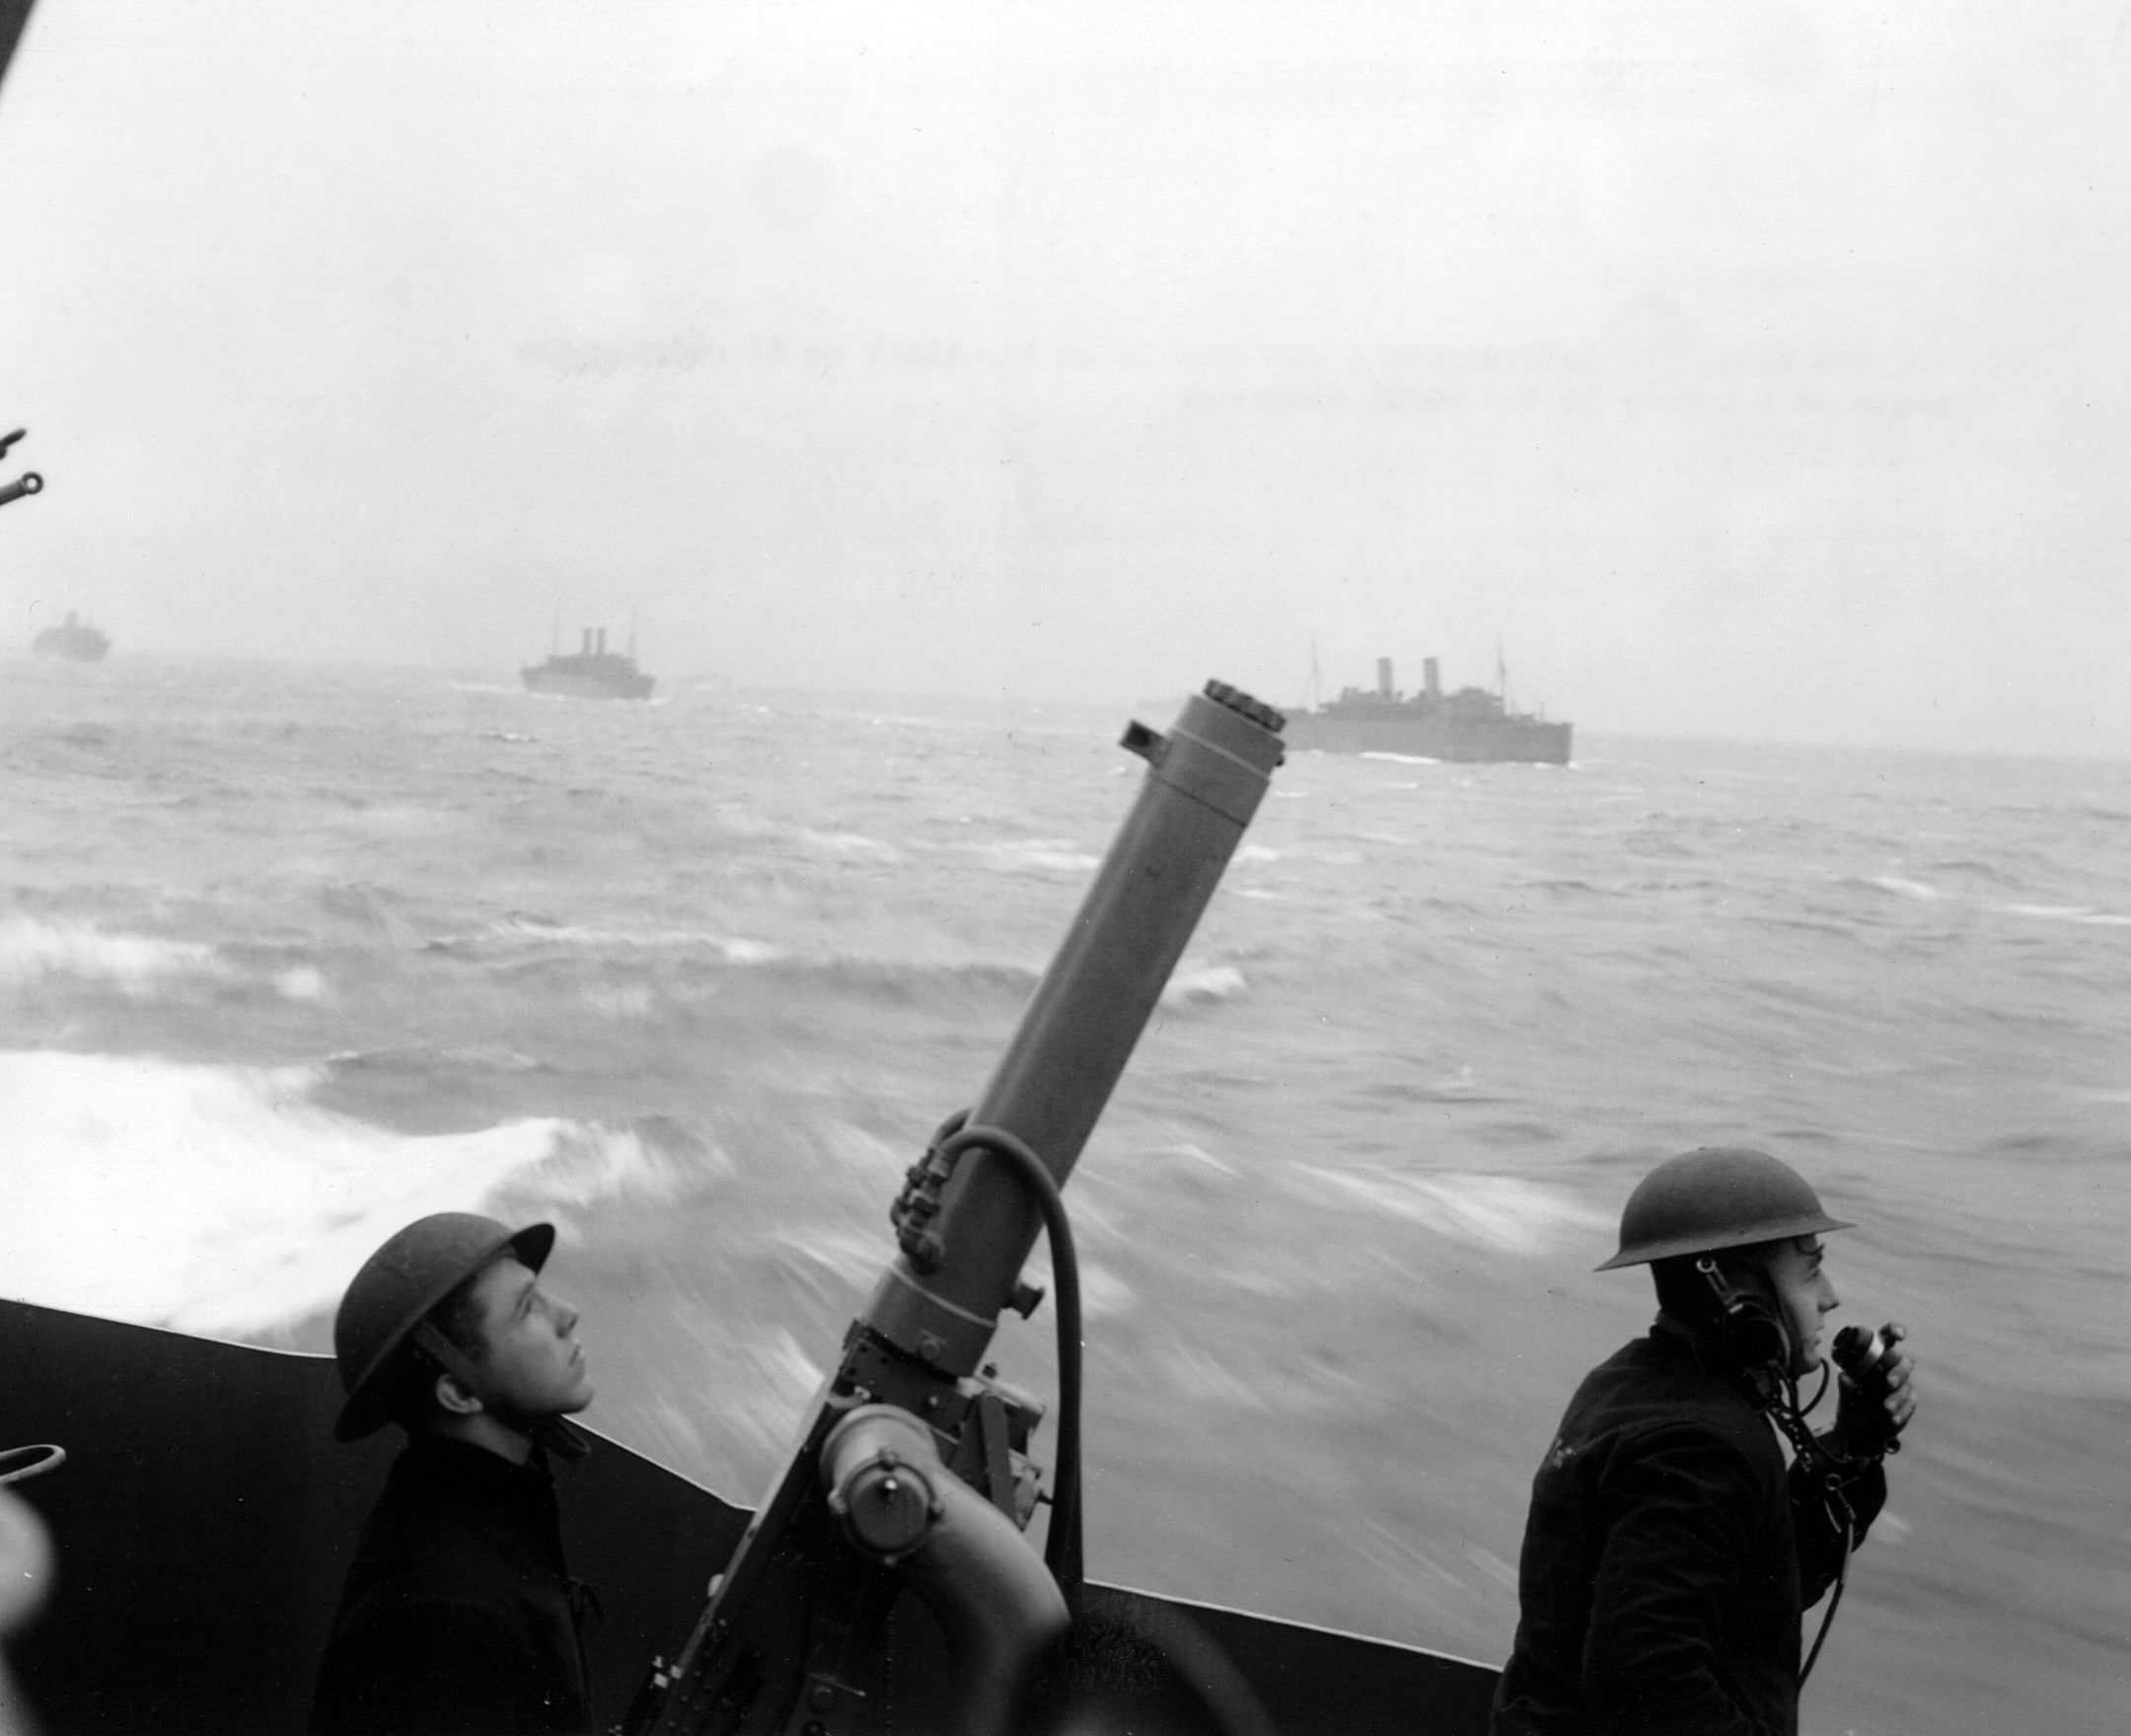 Scanning the skies above the North Atlantic, the crew of a shipboard machine gun stands at the ready. Often, a lone reconnaissance plane appeared initially, but was quickly followed by dive-bombers and torpedo planes.